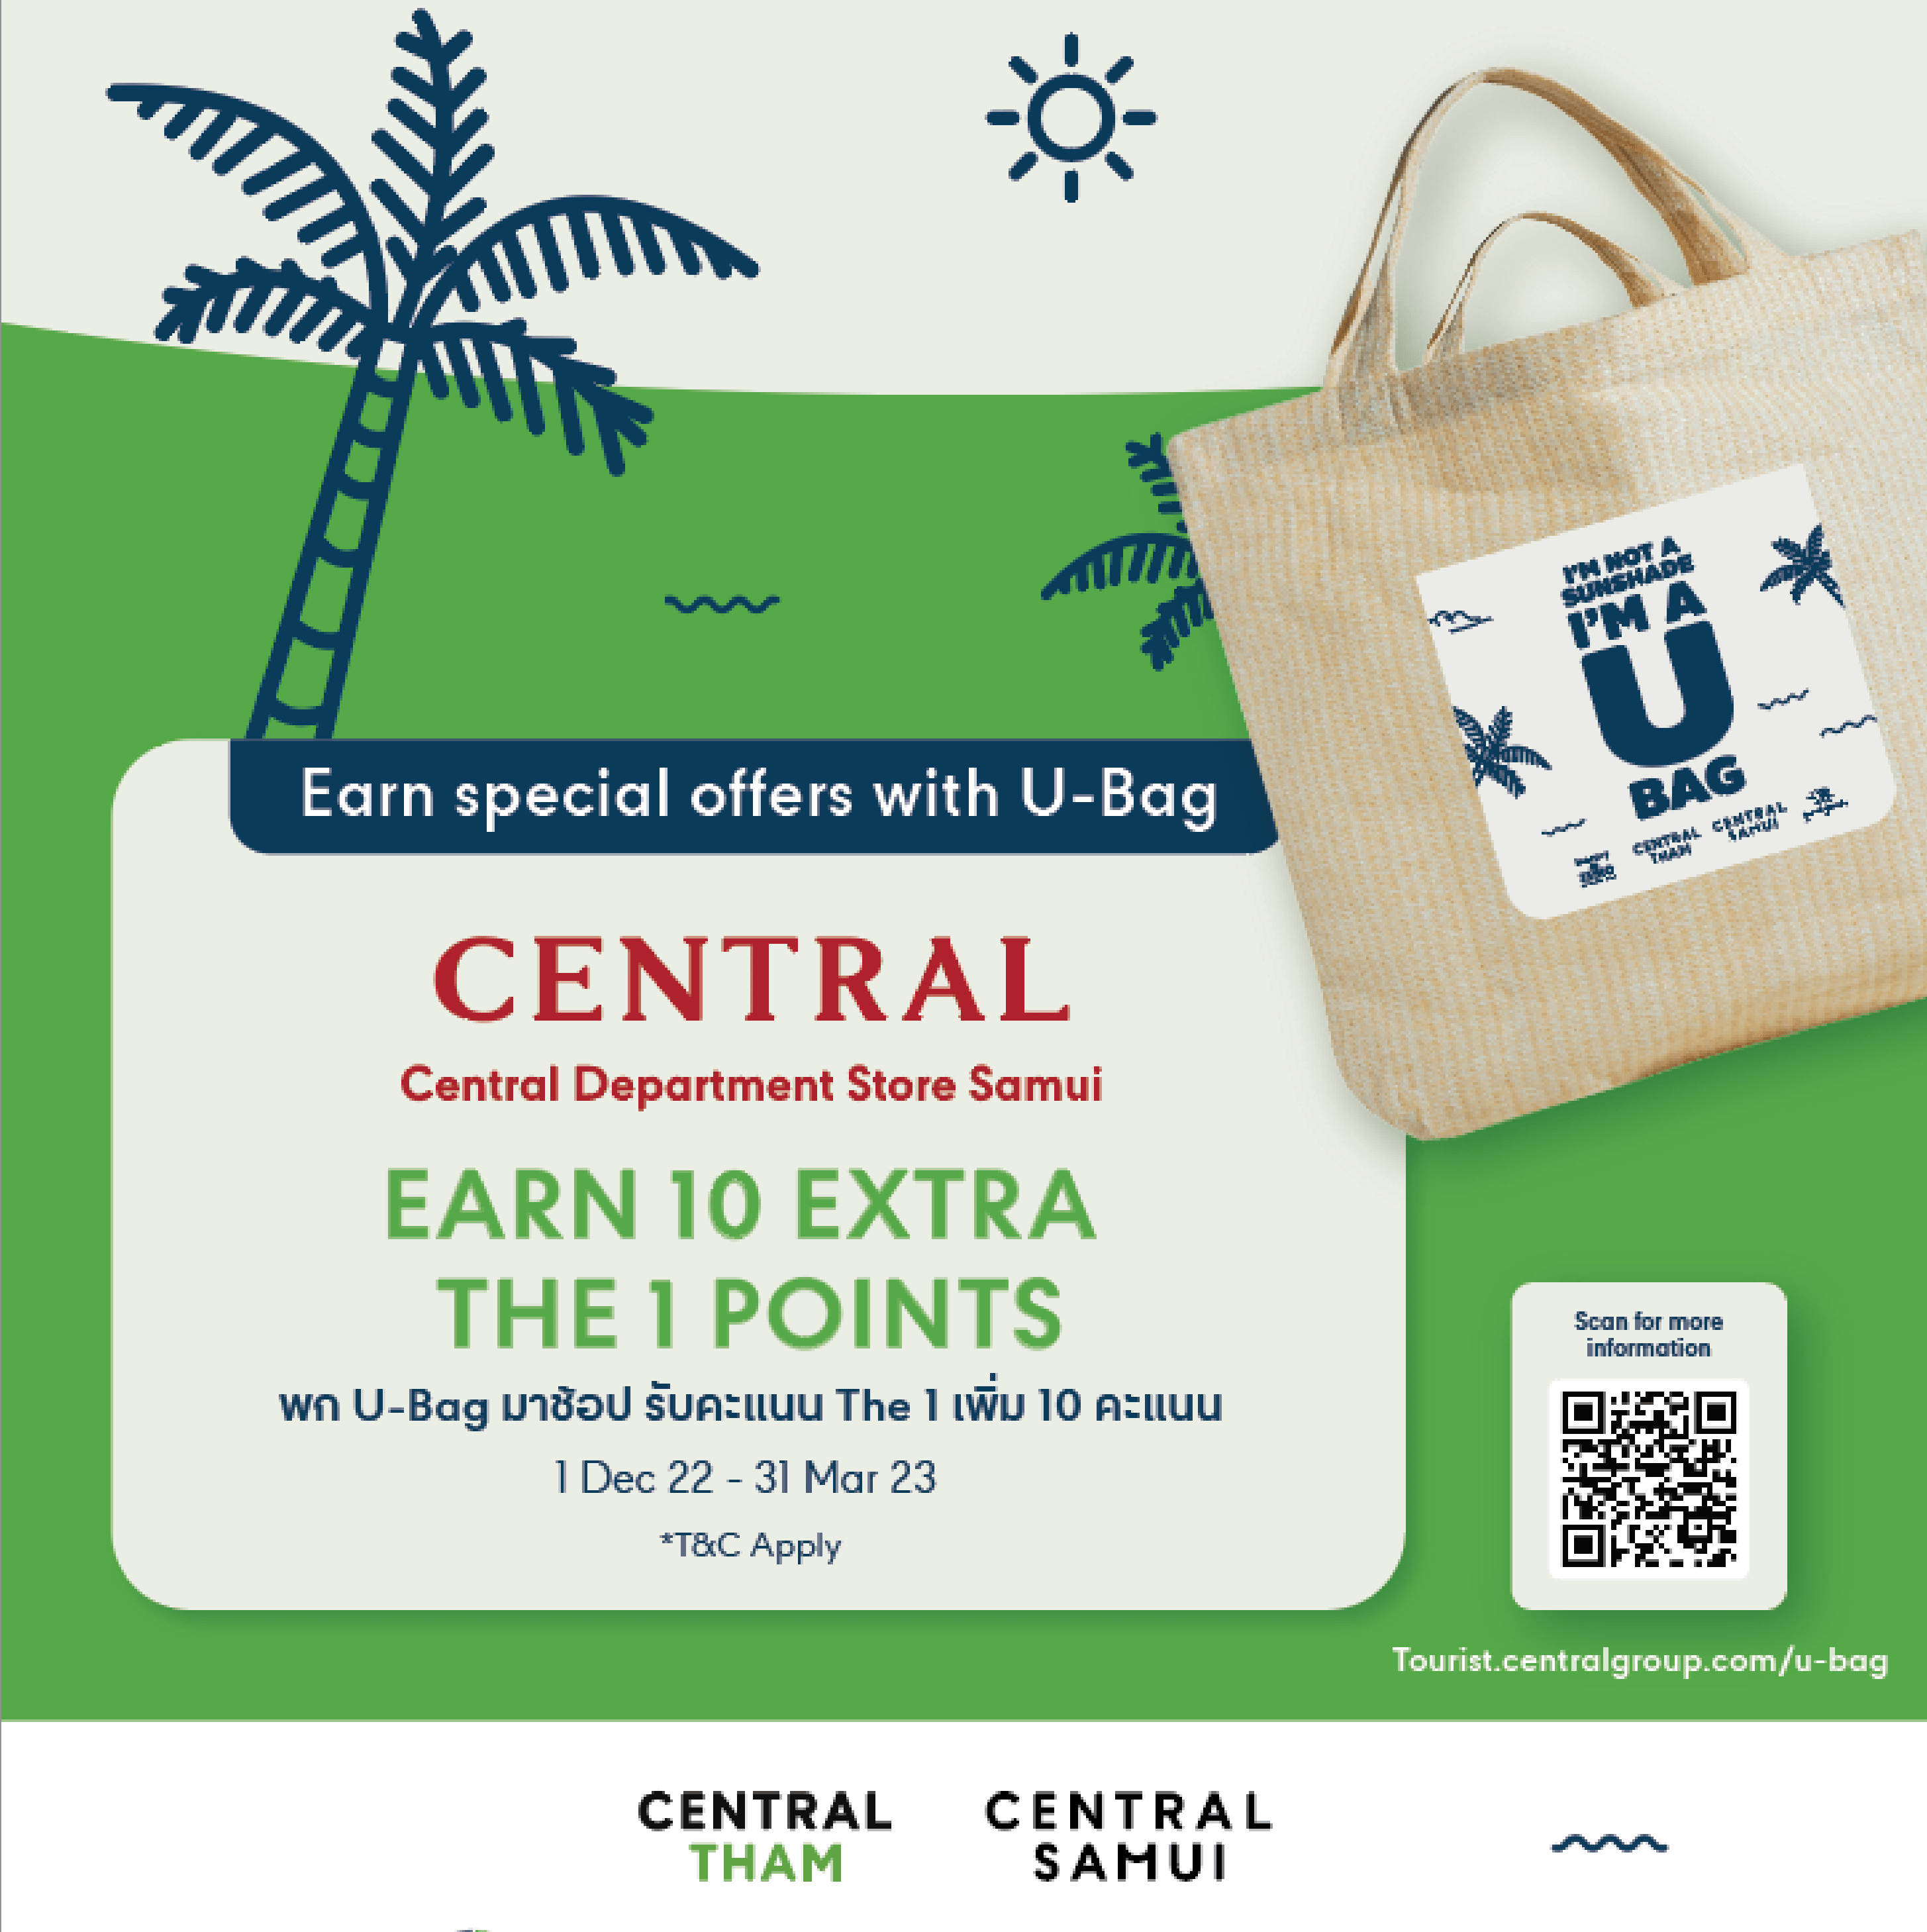 CENTRAL DEPARTMENT STORE Earn 10 extra The1 points